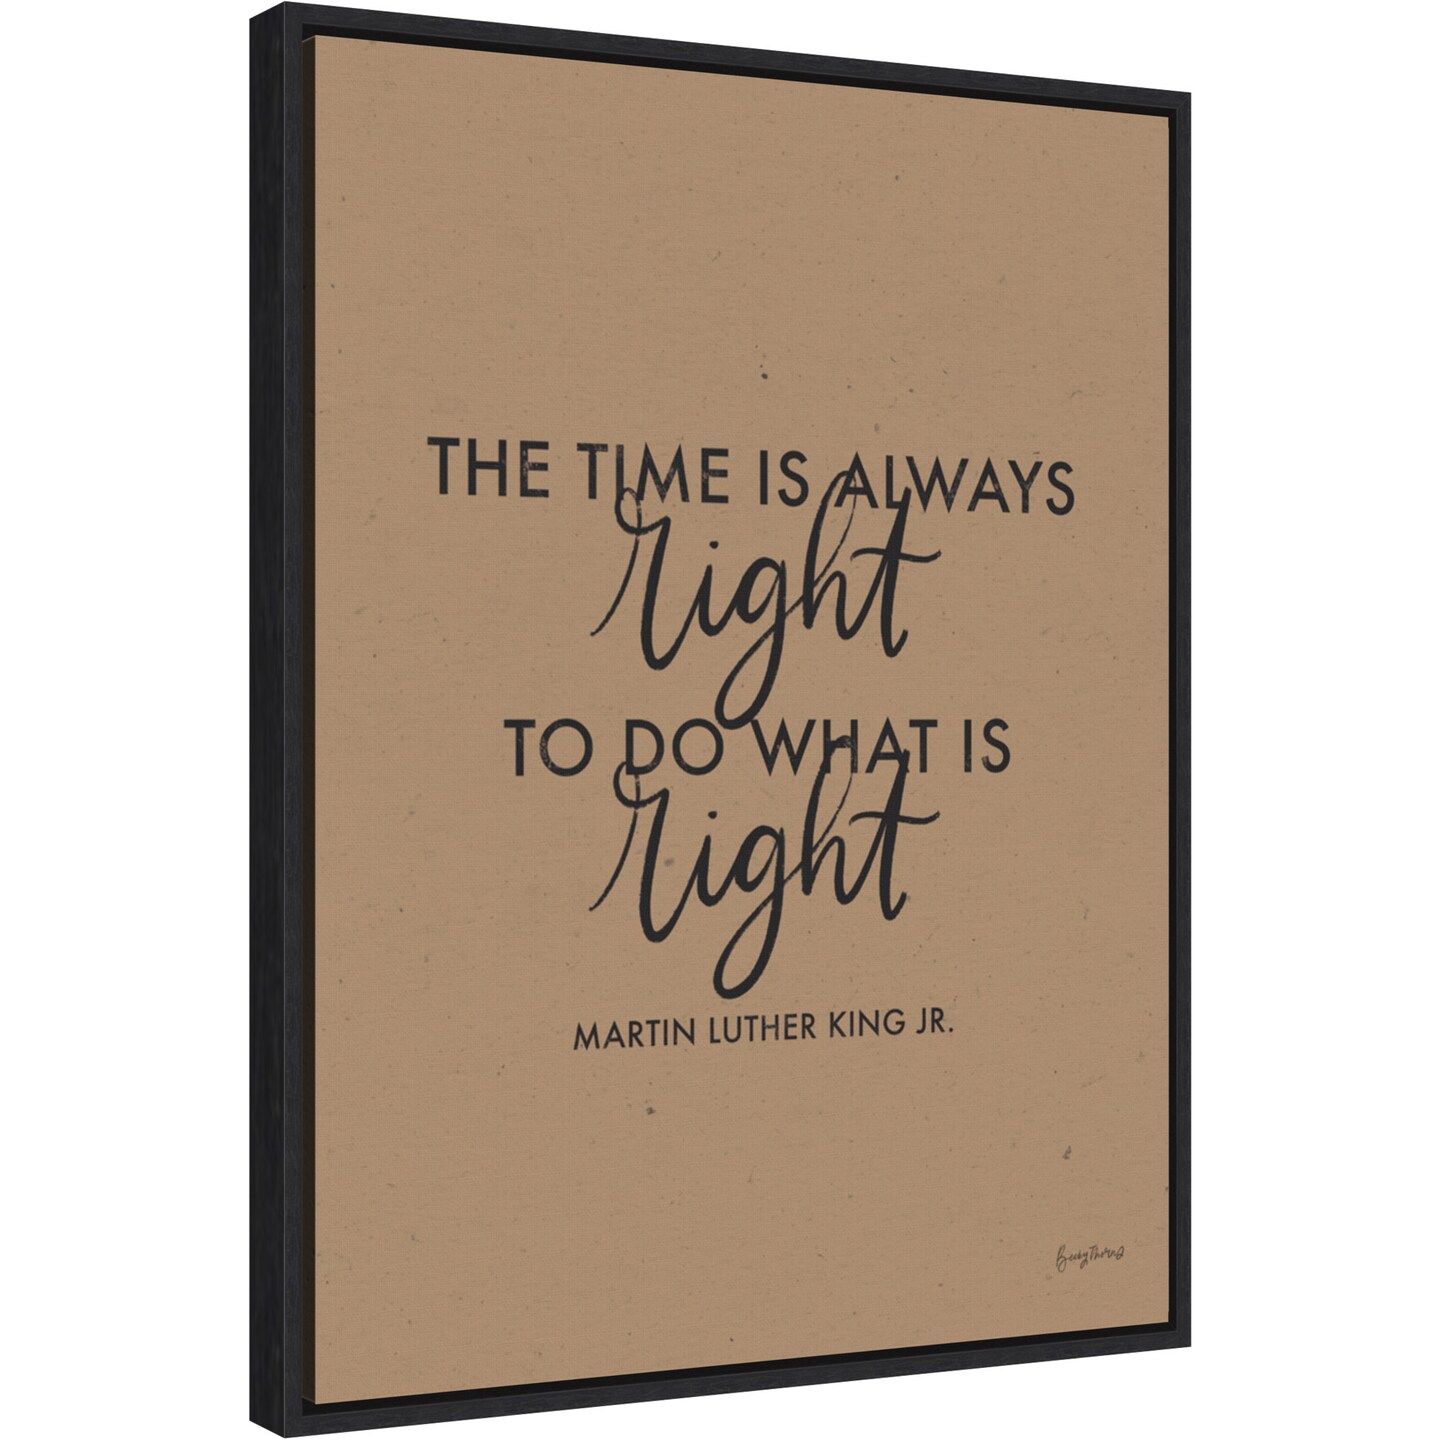 Words of Wisdom IV - The Time is Right by Becky Thorns 18-in. W x 24-in. H. Canvas Wall Art Print Framed in Black